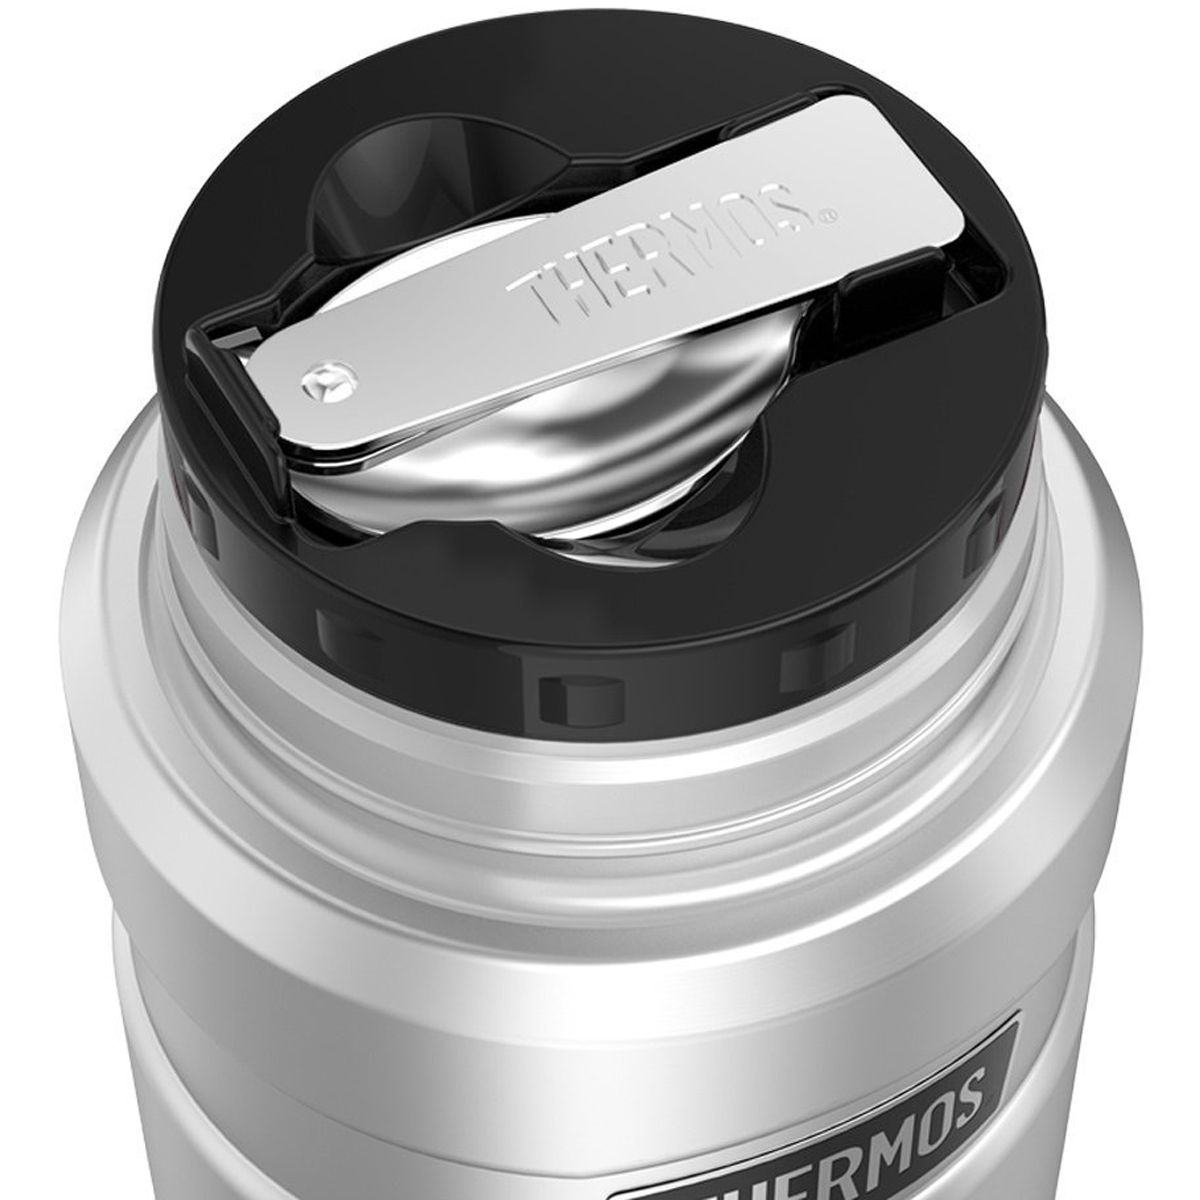 Thermos Stainless King 16 Ounce Food Jar with Folding Spoon, Matte Stainless - image 2 of 5